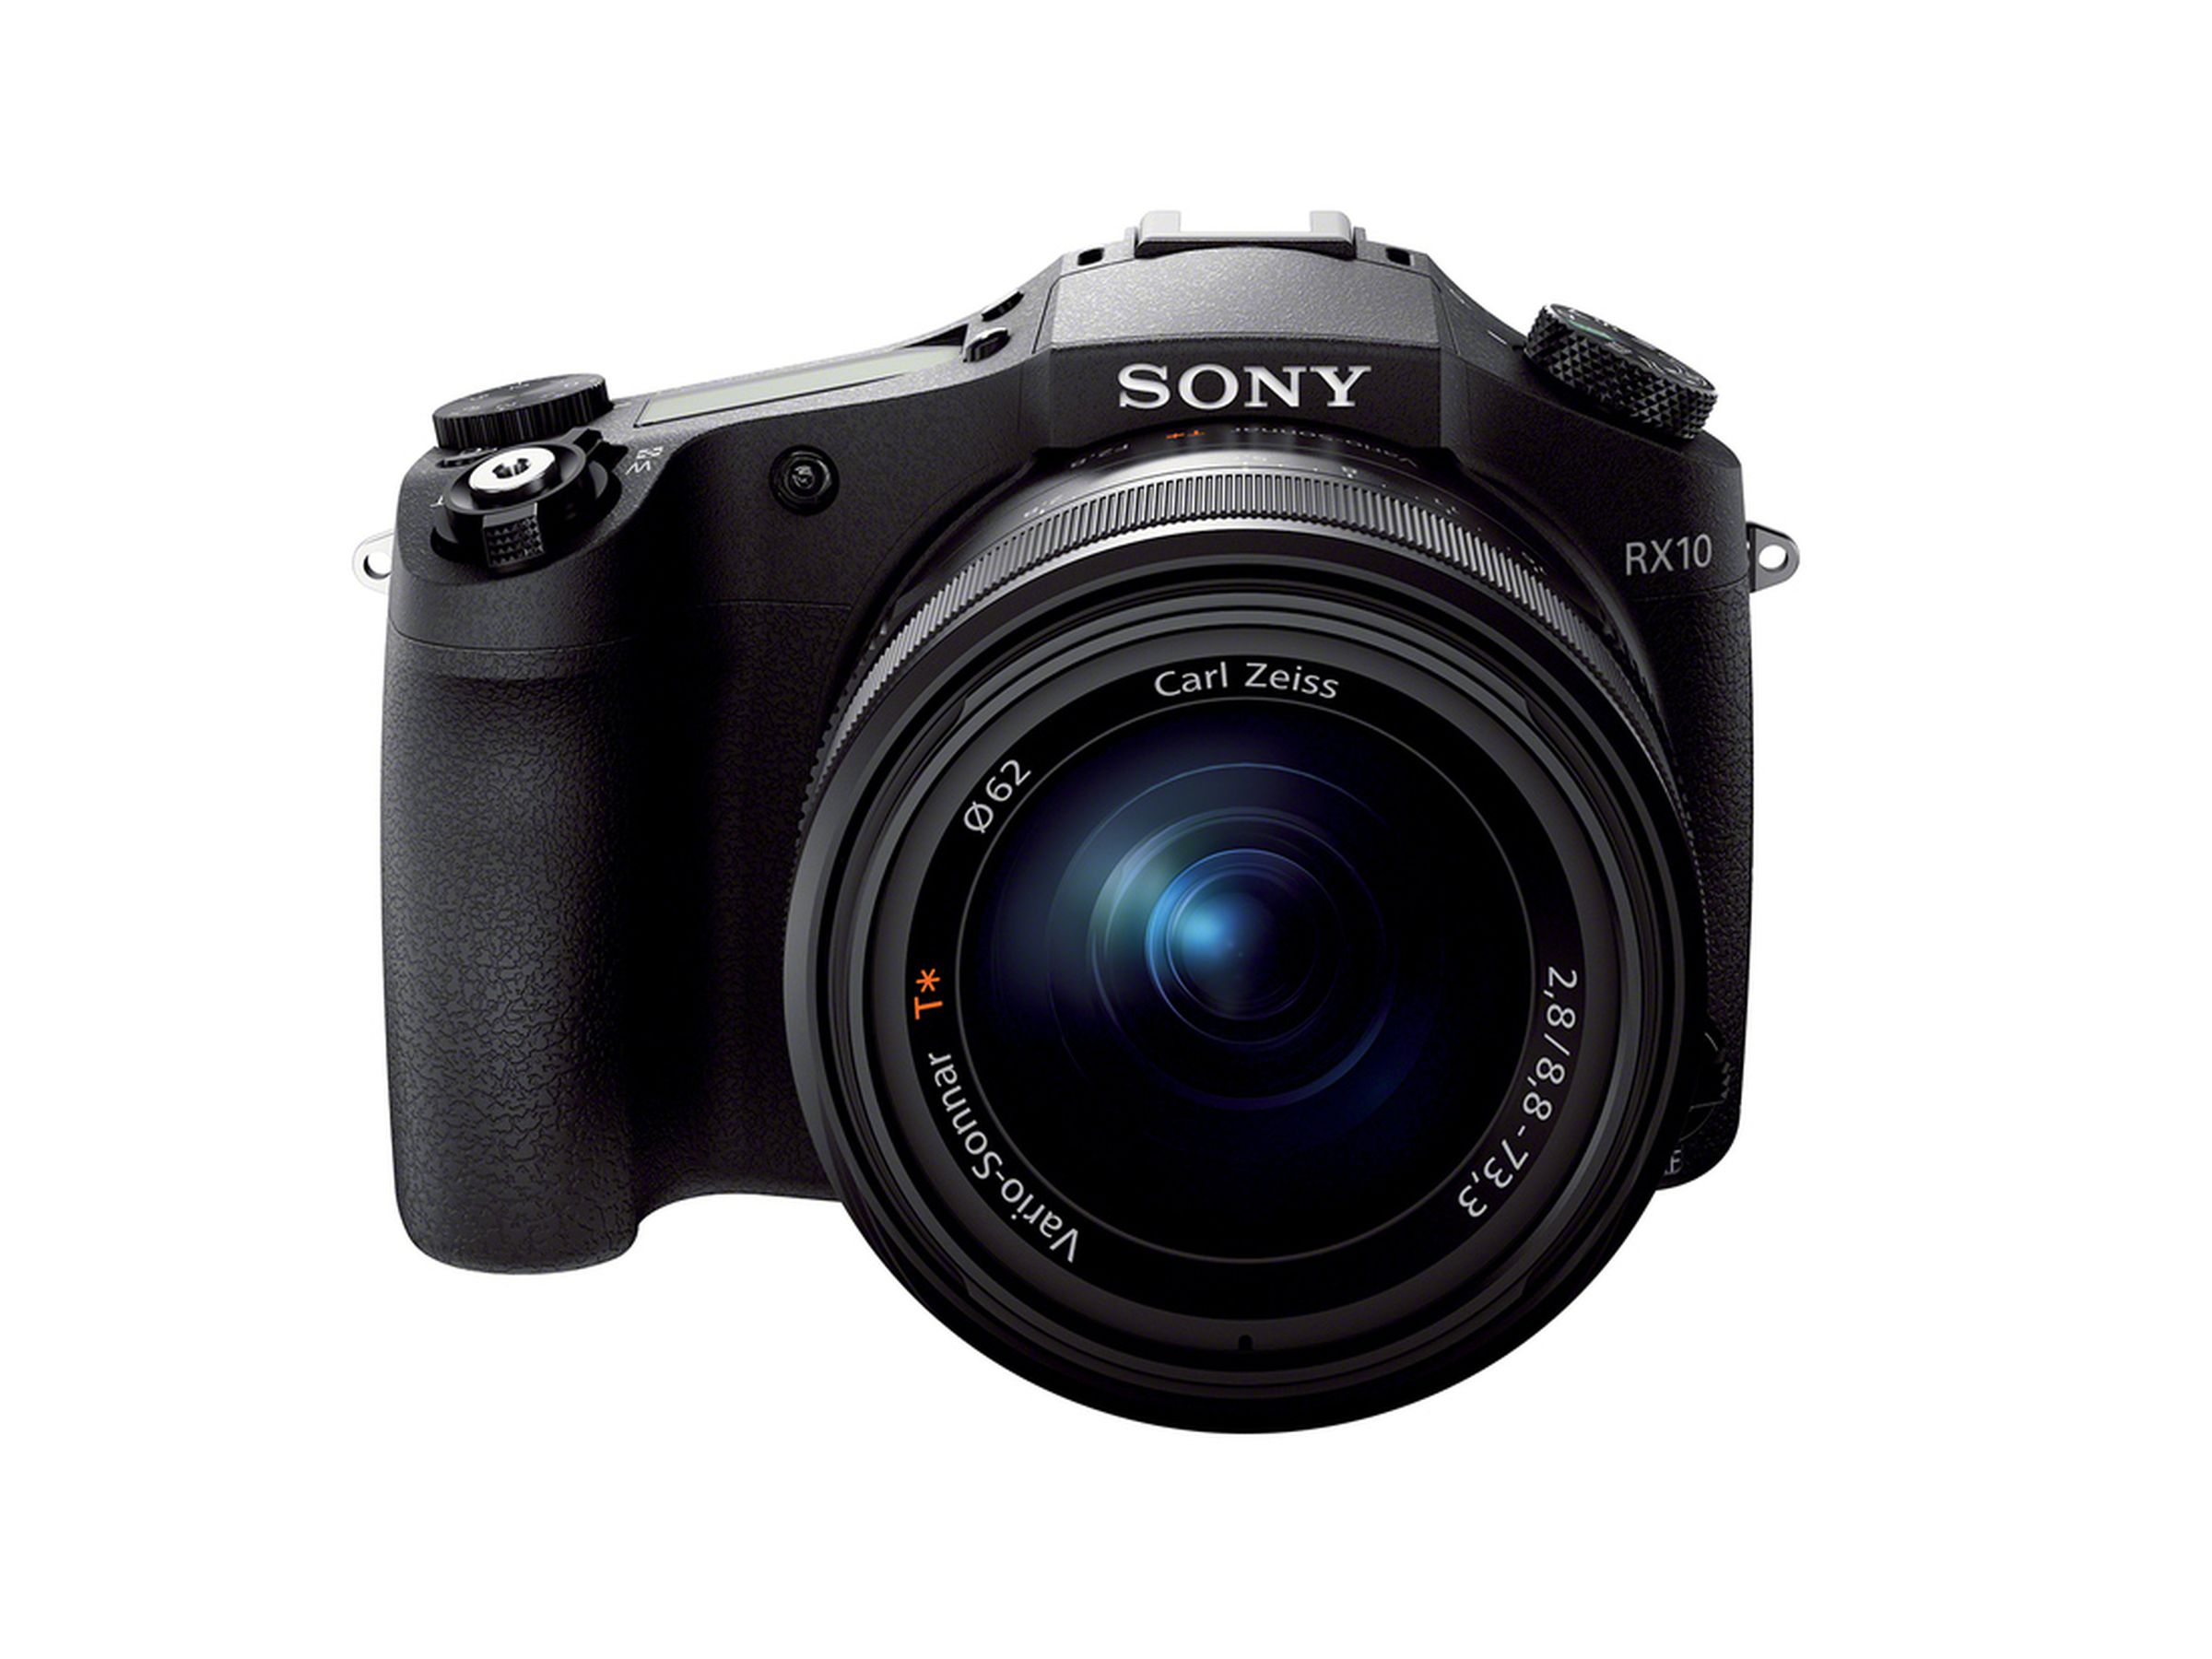 Sony RX10 images